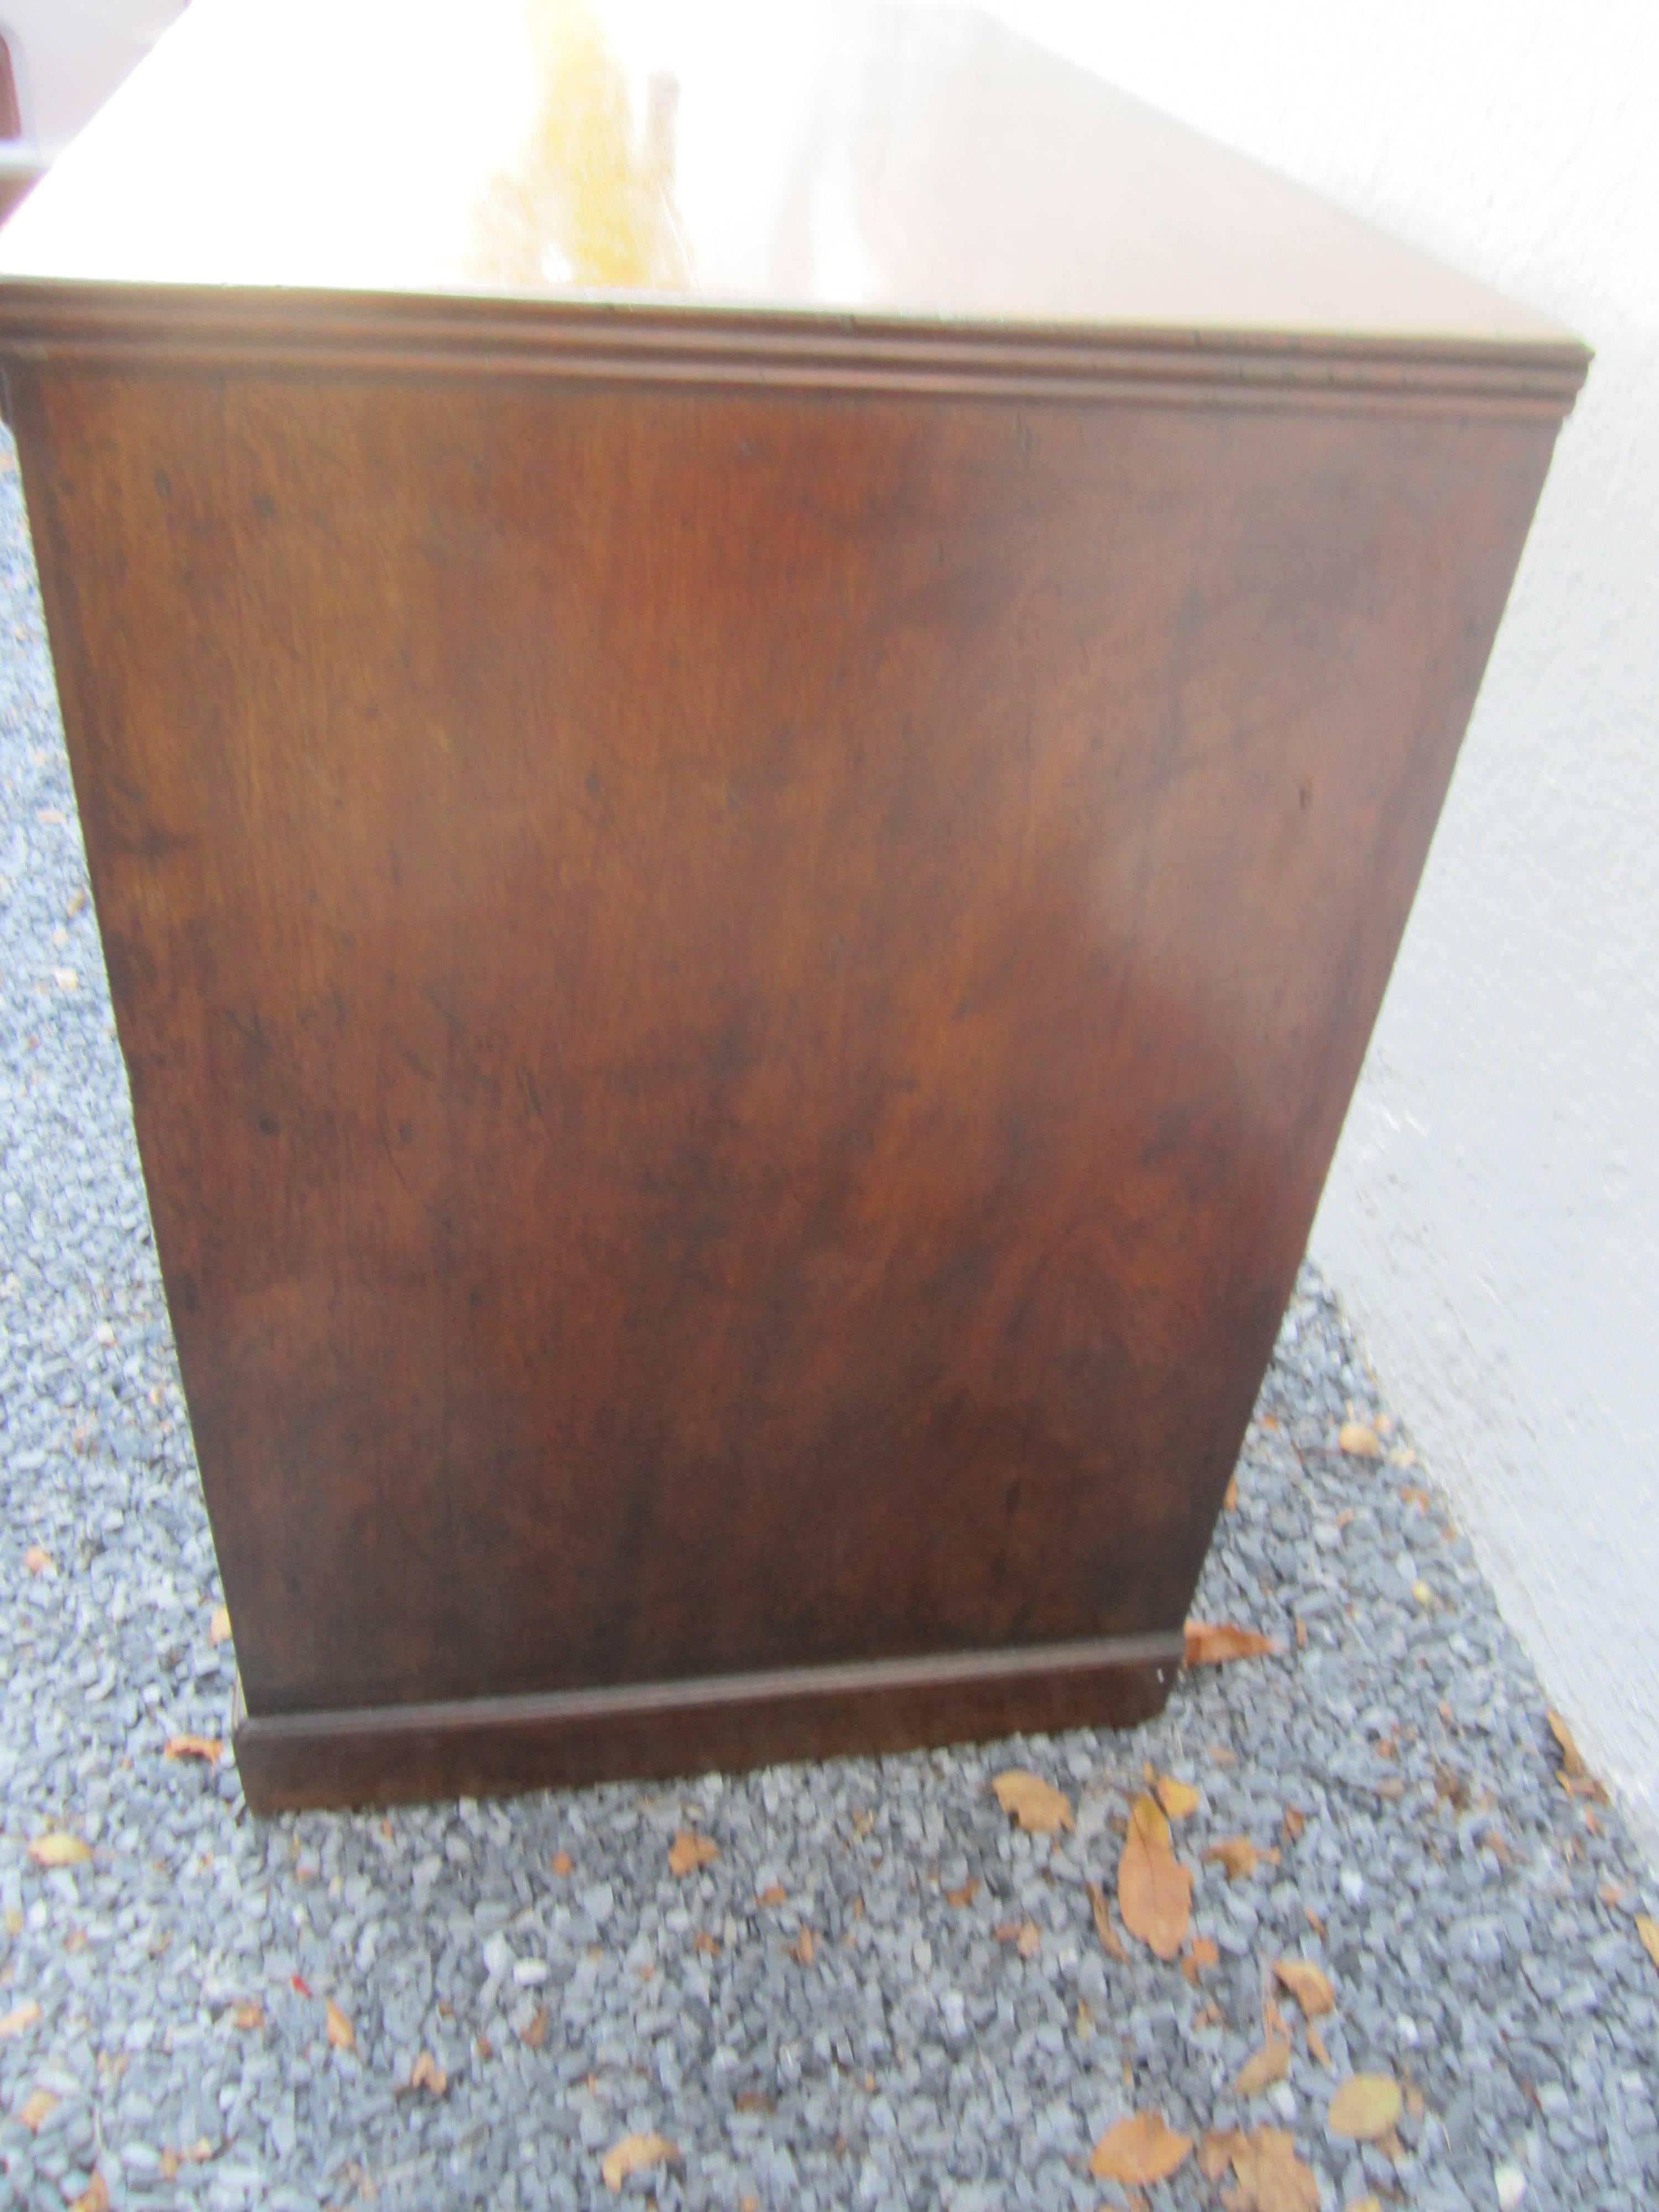 Federal knee hole desk/ nighstand......small desk ideal for nightstand or bedside table......beautiful scale and patina.....with leather pull-out shelf and 5 drawers lined in Italian paper.....